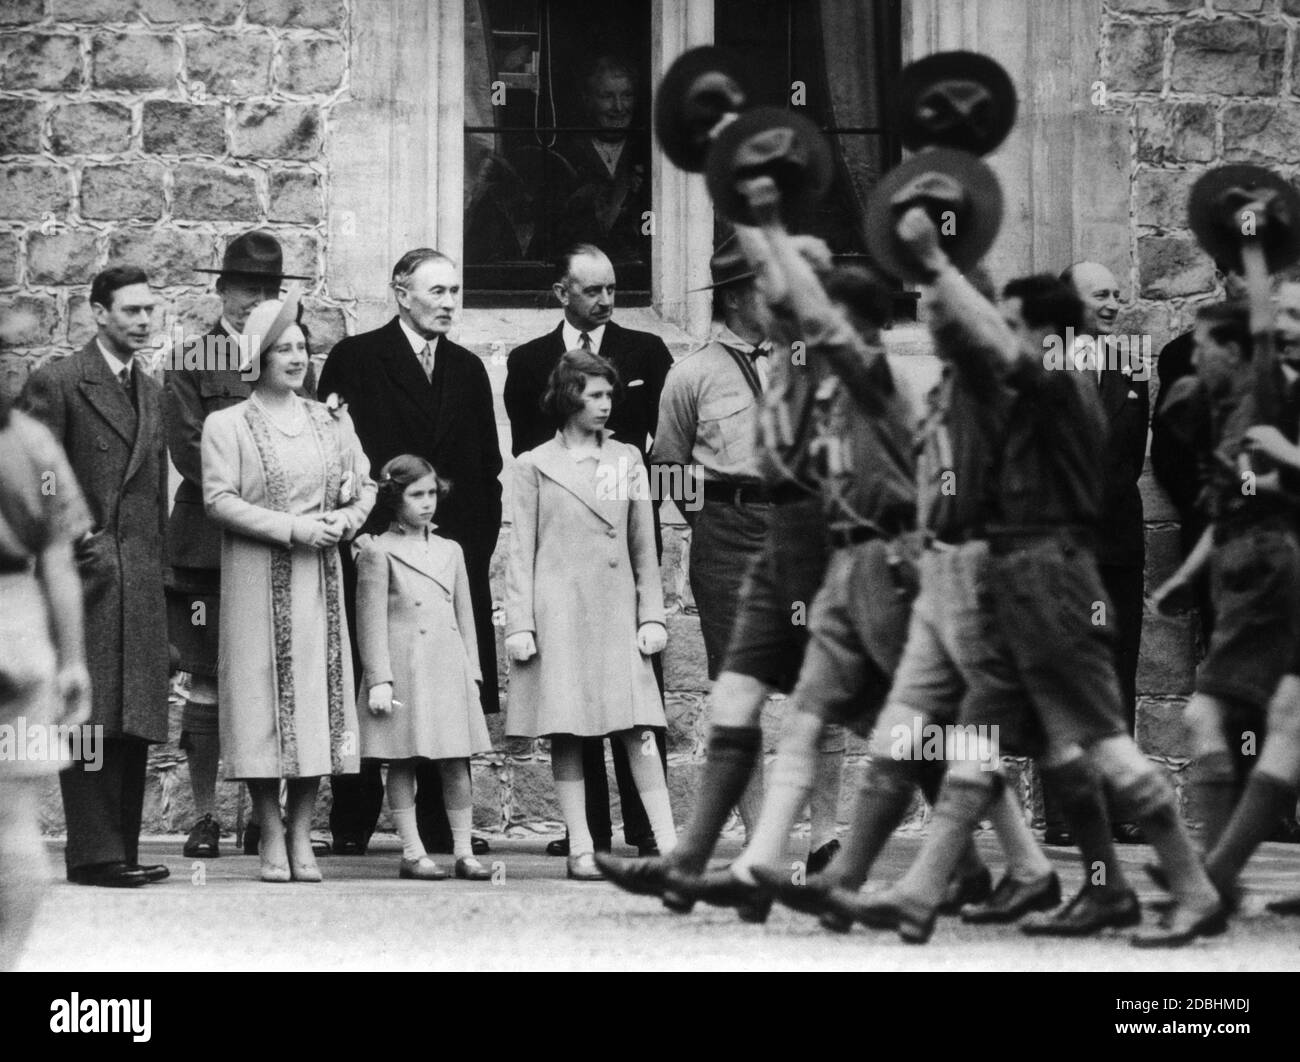 More than 1000 scout boys walk past the royal family and greet them. From left to right: King George VI, Queen Elizabeth, Princess Elizabeth, Princess Margaret Rose and the Archbishop of Canterburry. Stock Photo